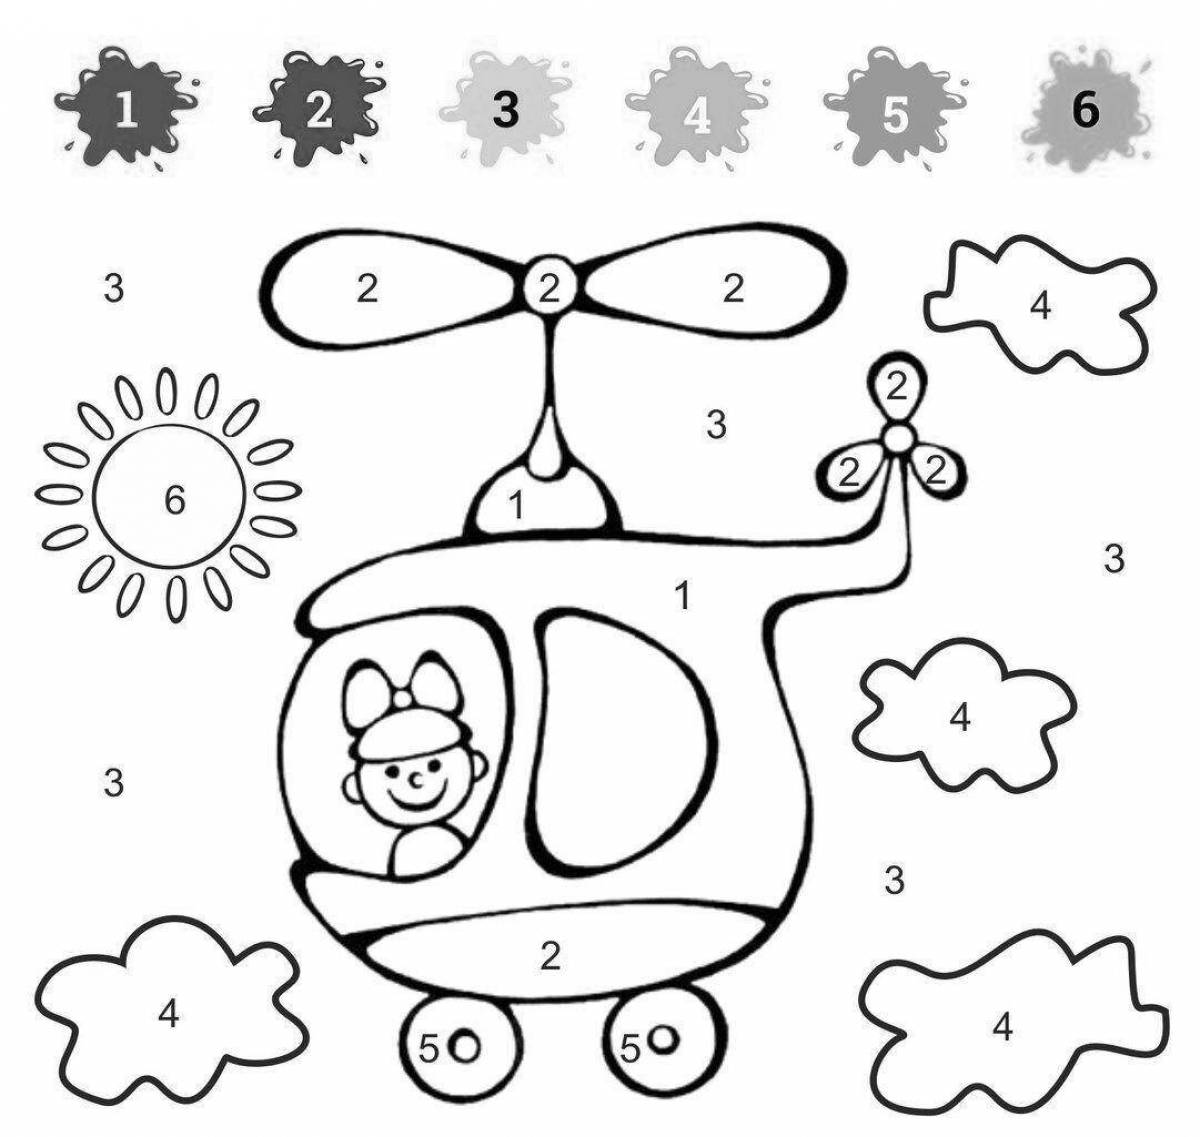 Witty aircraft numbers coloring page